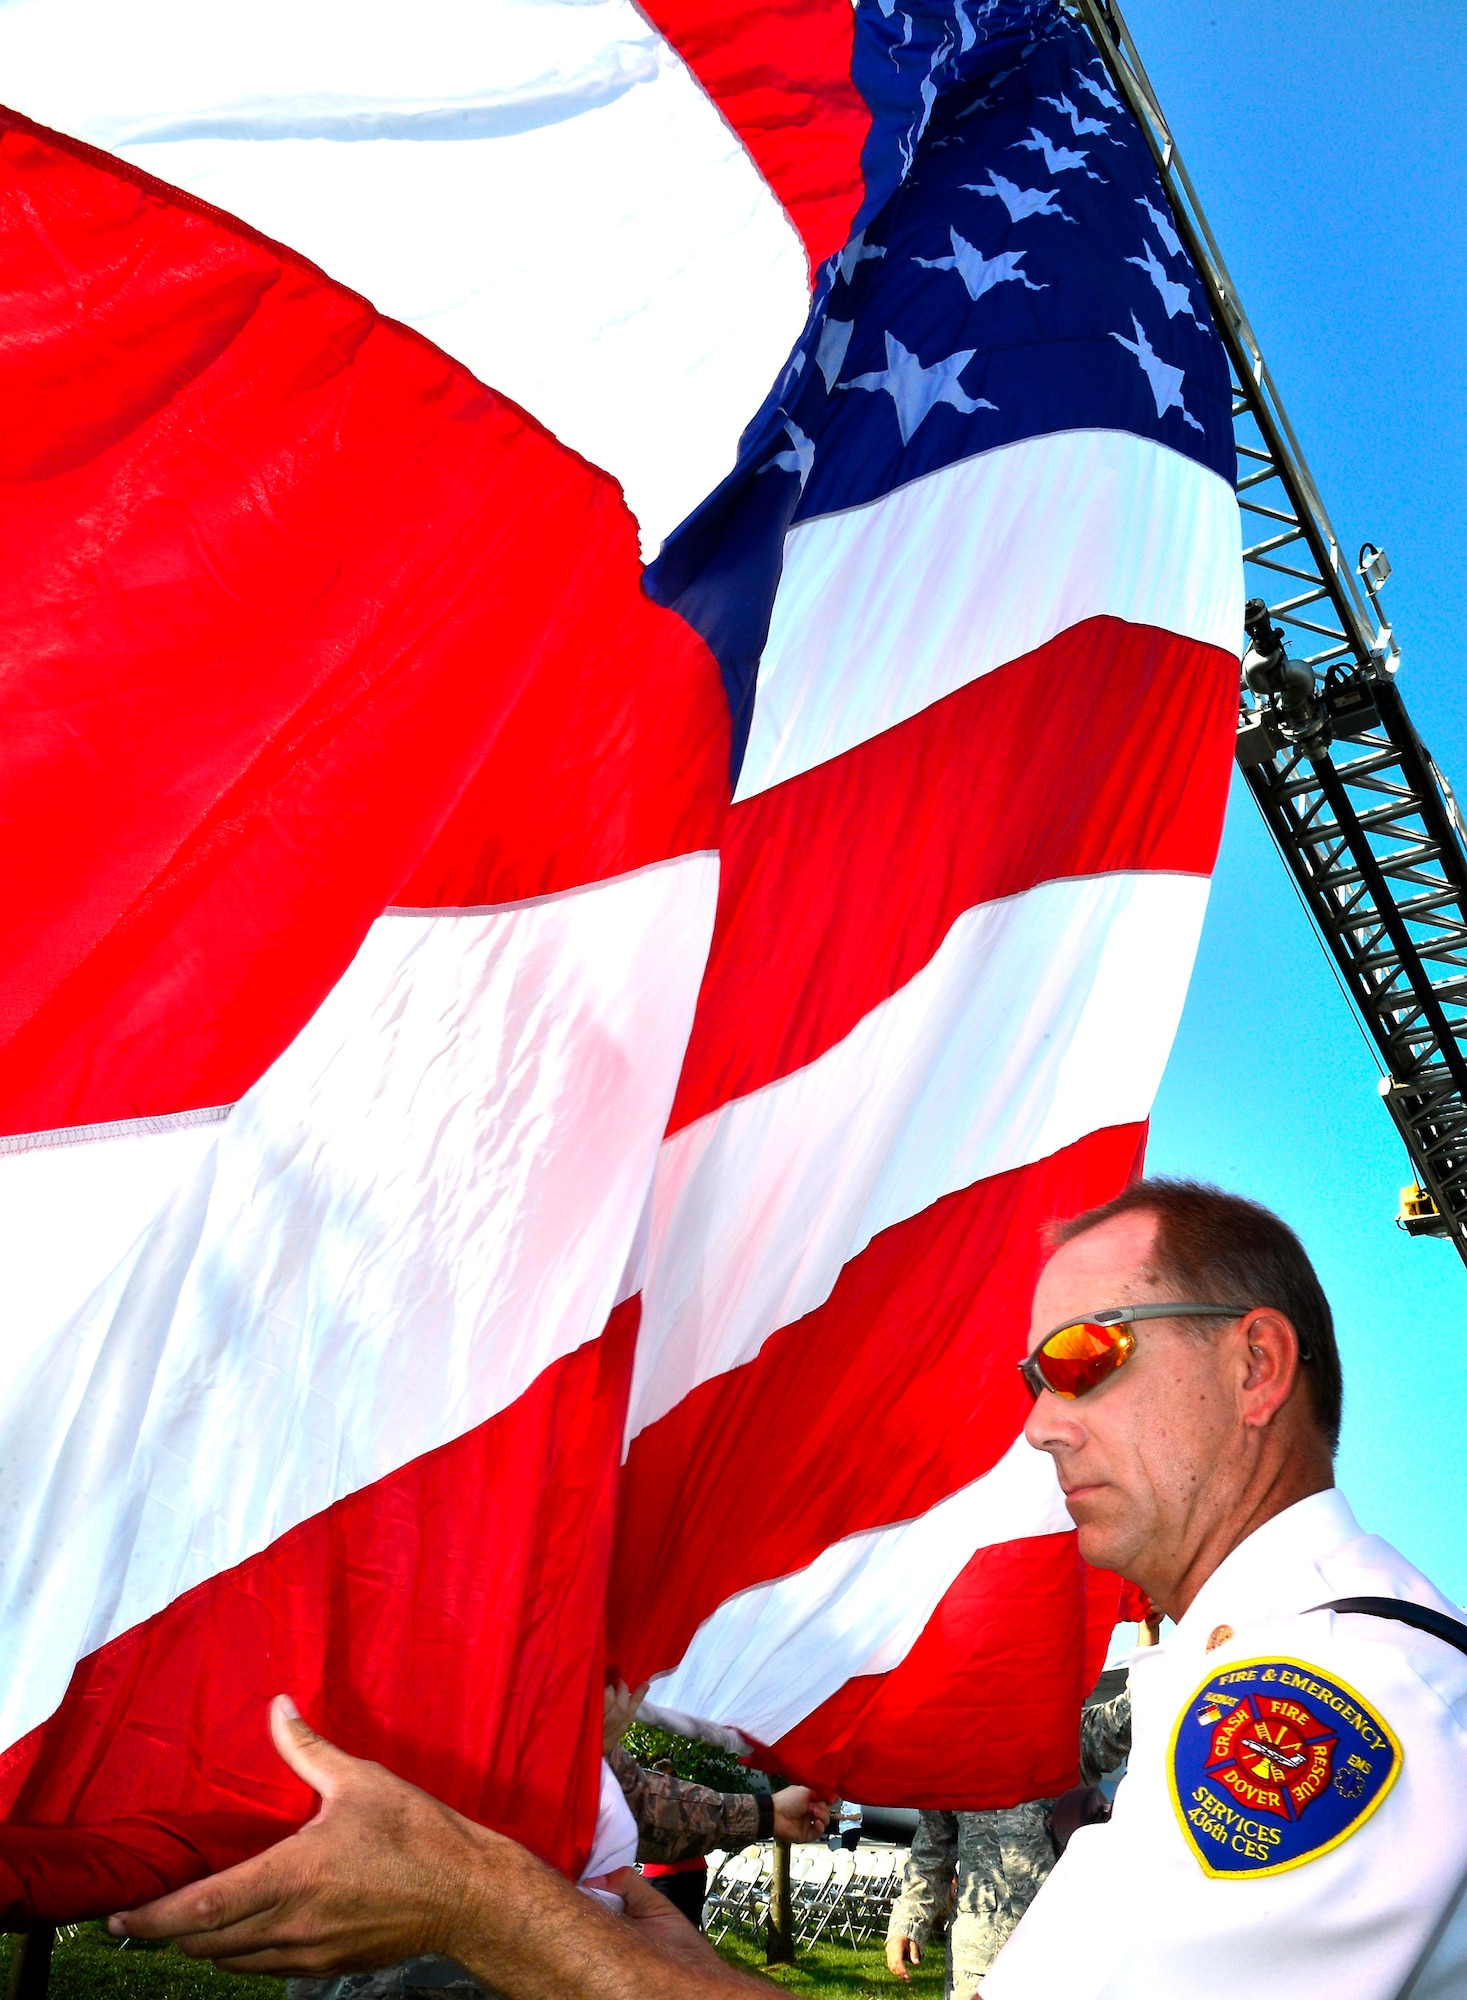 Joseph S. Mriss, 436th Civil Engineer Squadron assistant fire chief, directs the raising of the American Flag during a dedication ceremony Sept. 11, 2013, at the Air Mobility Command Museum on Dover Air Force Base, Del. A memorial, which incorporates two pieces of steel from World Trade Center tower one, a rock from the United Airlines Flight 93 crash site and a block from the damaged portion of the Pentagon, was unveiled at the ceremony. (U.S. Air Force photo/David S. Tucker)

 